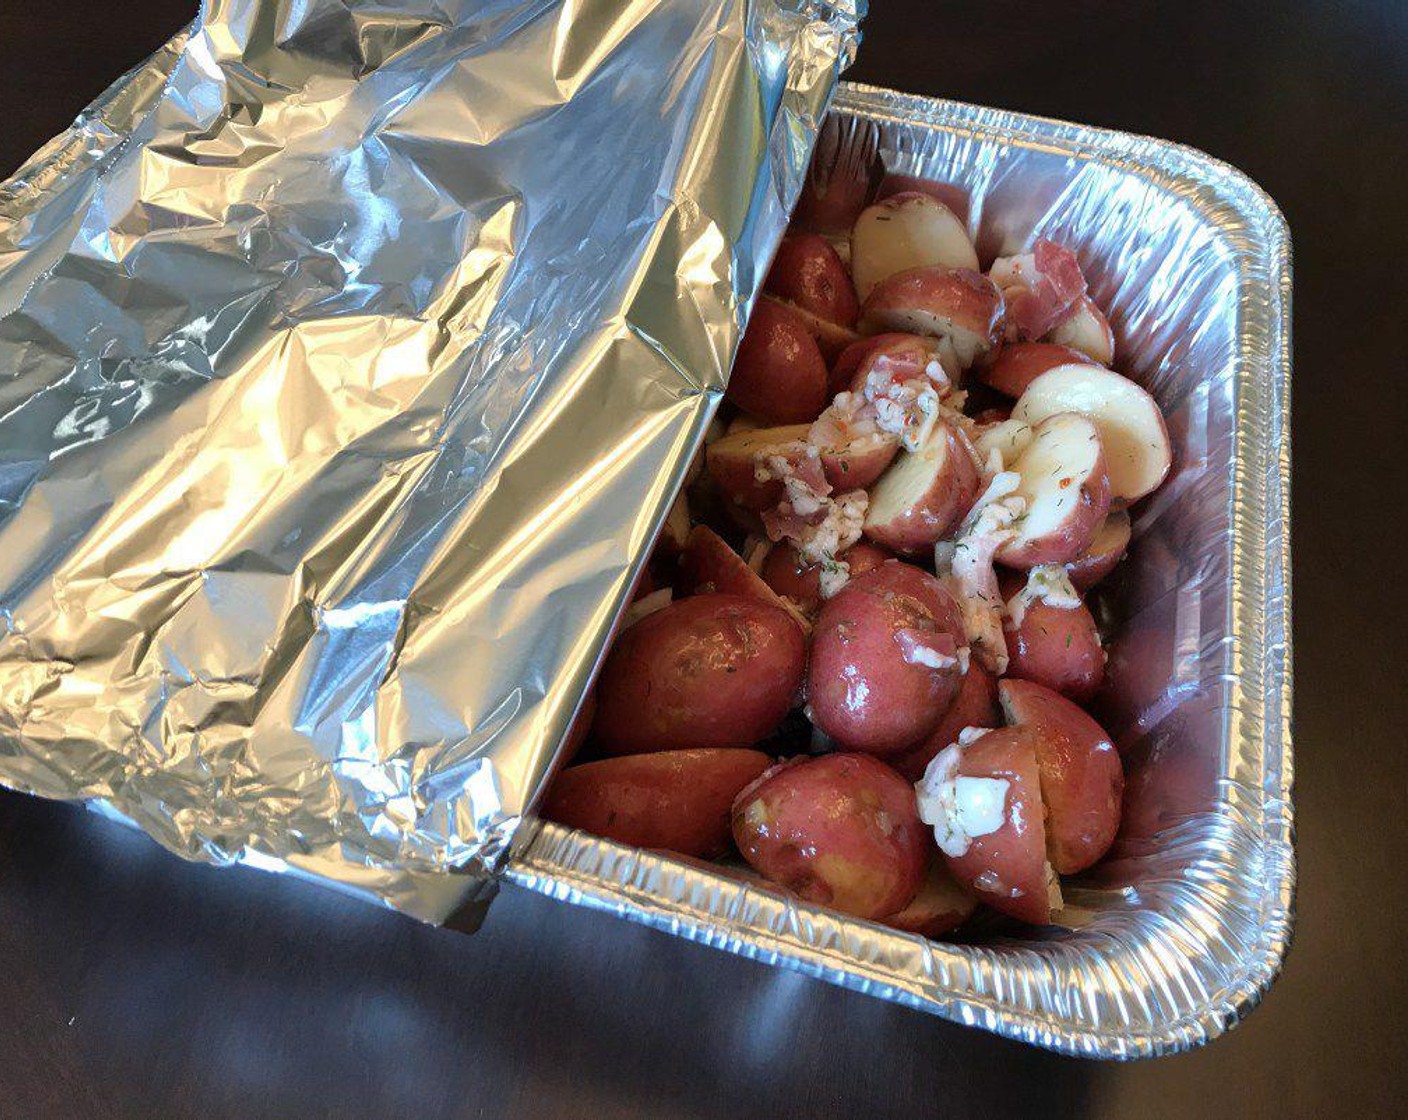 step 7 Pour potatoes into a 9x11 foil roasting pan (or equivalent size) and cover with aluminum foil.